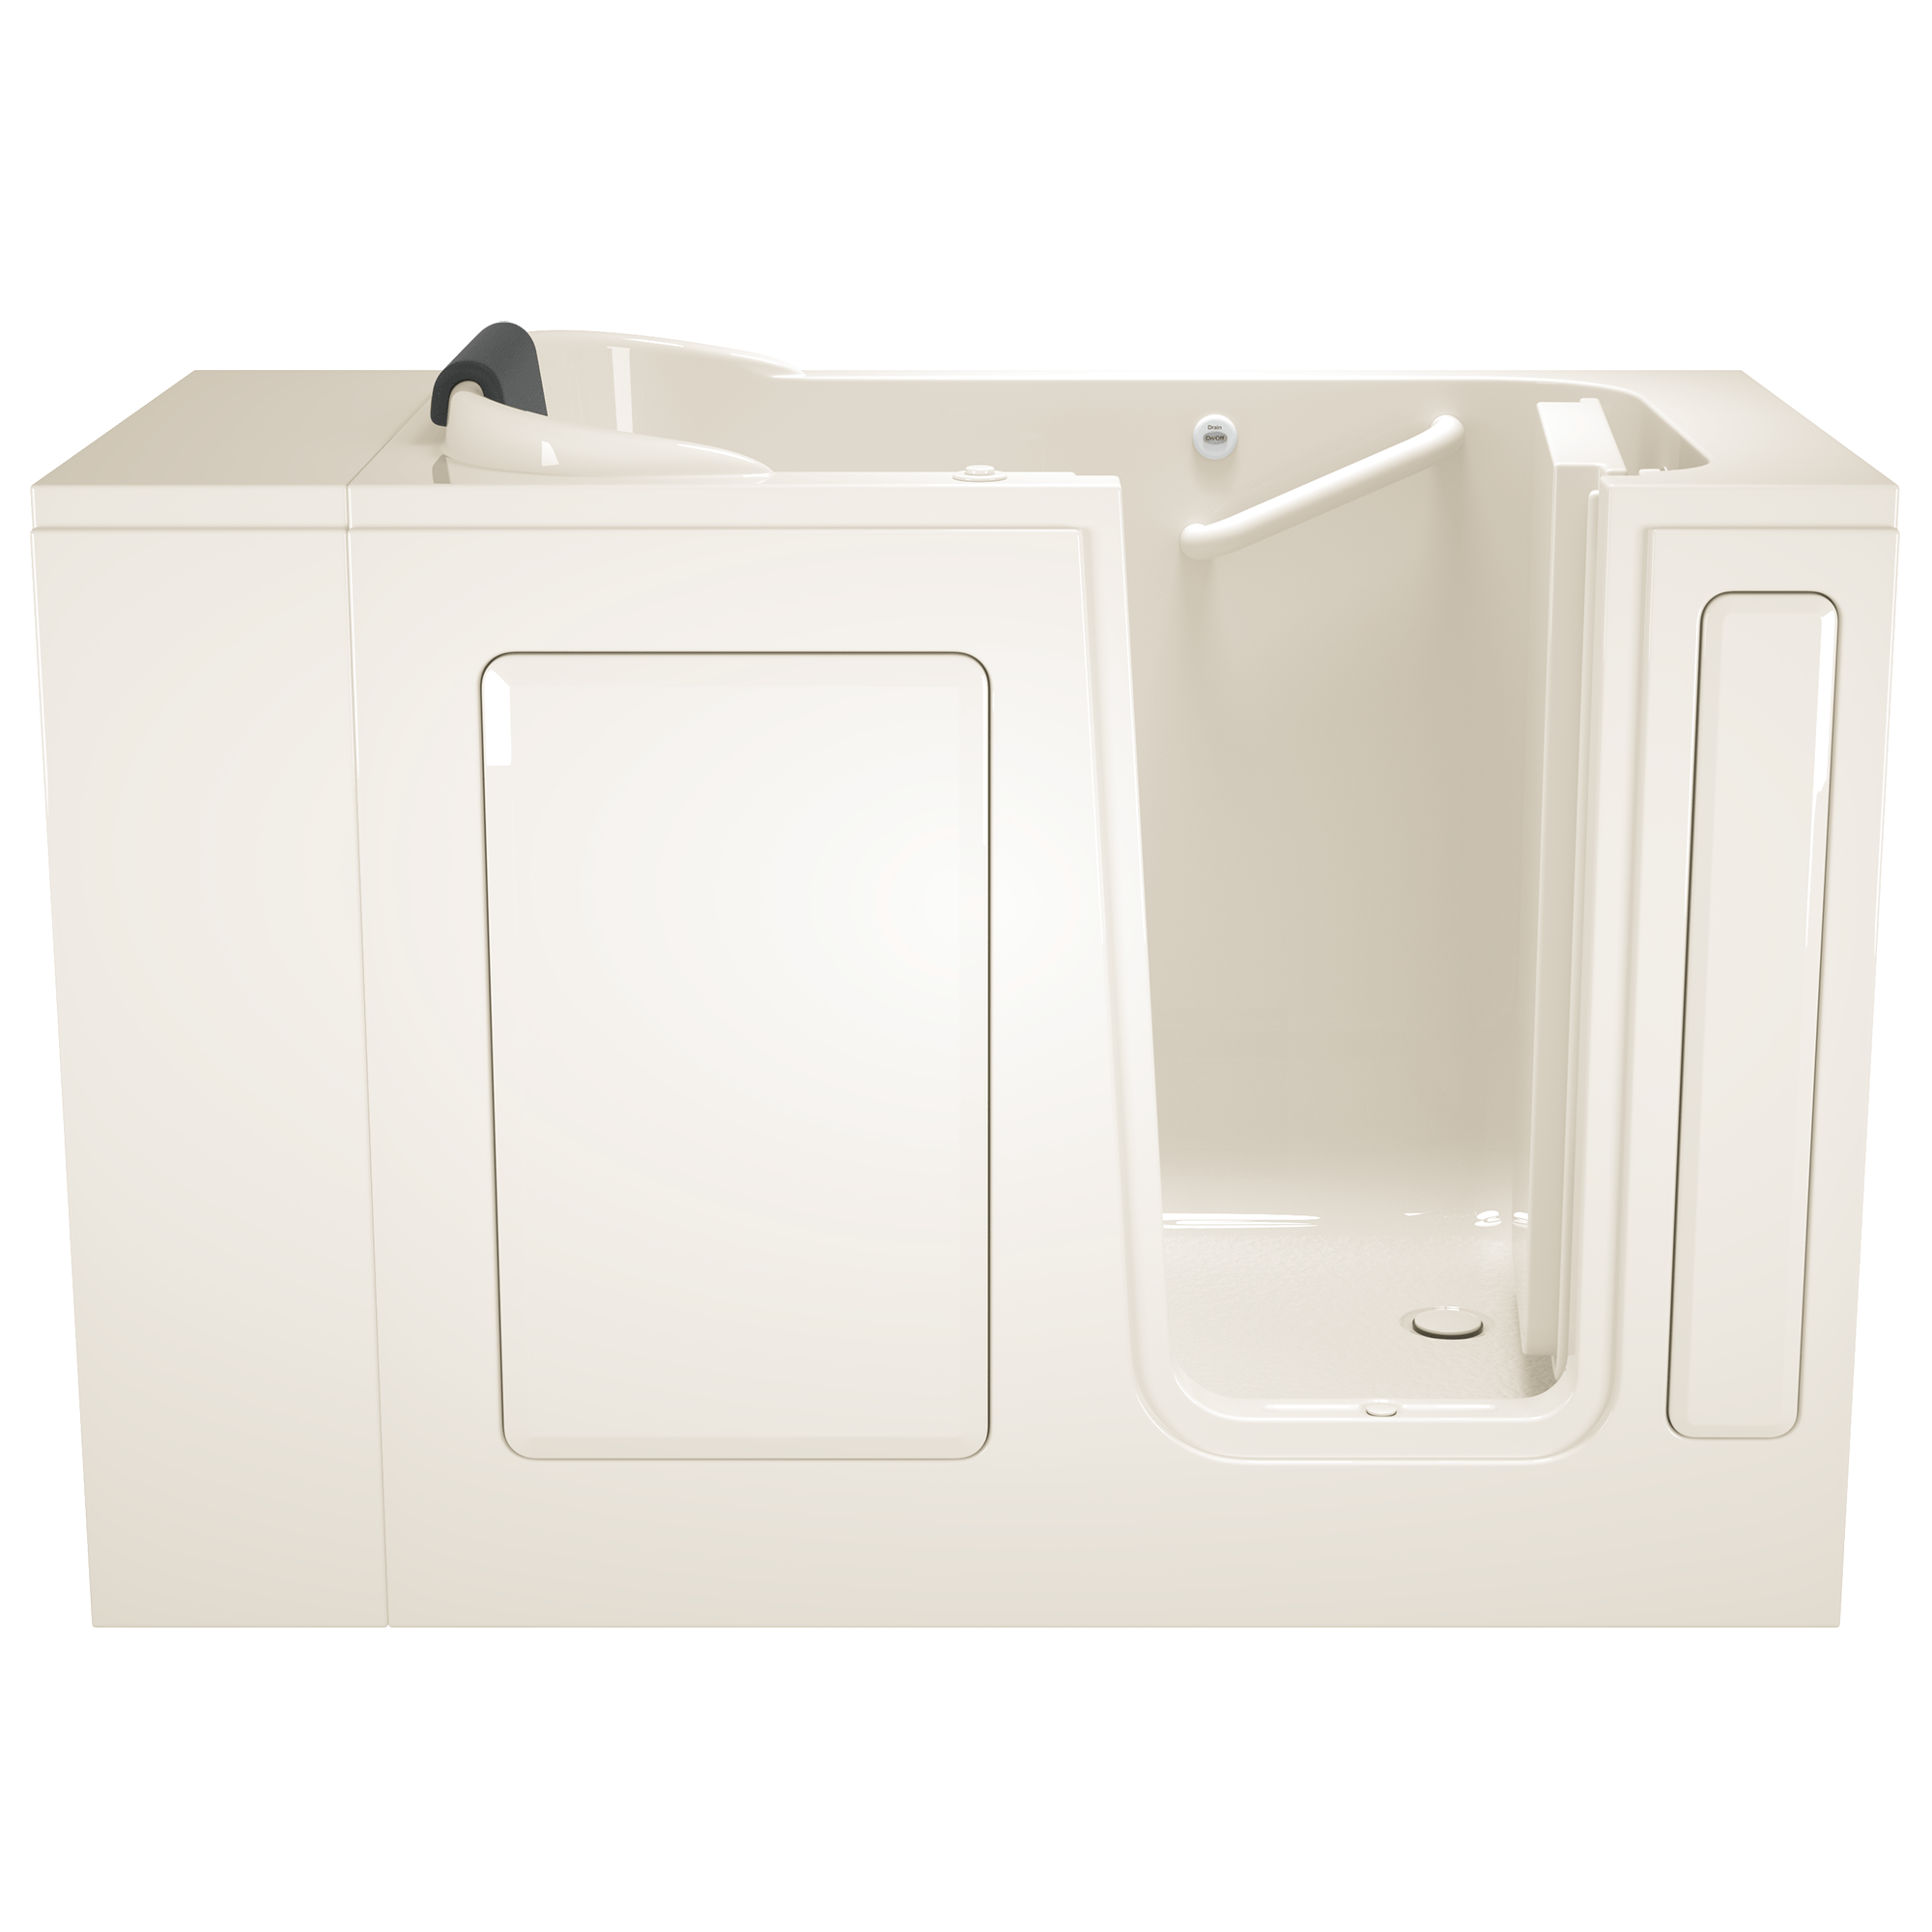 Gelcoat Premium Series 28 x 48 Inch Walk in Tub With Whirlpool System   Right Hand Drain WIB LINEN